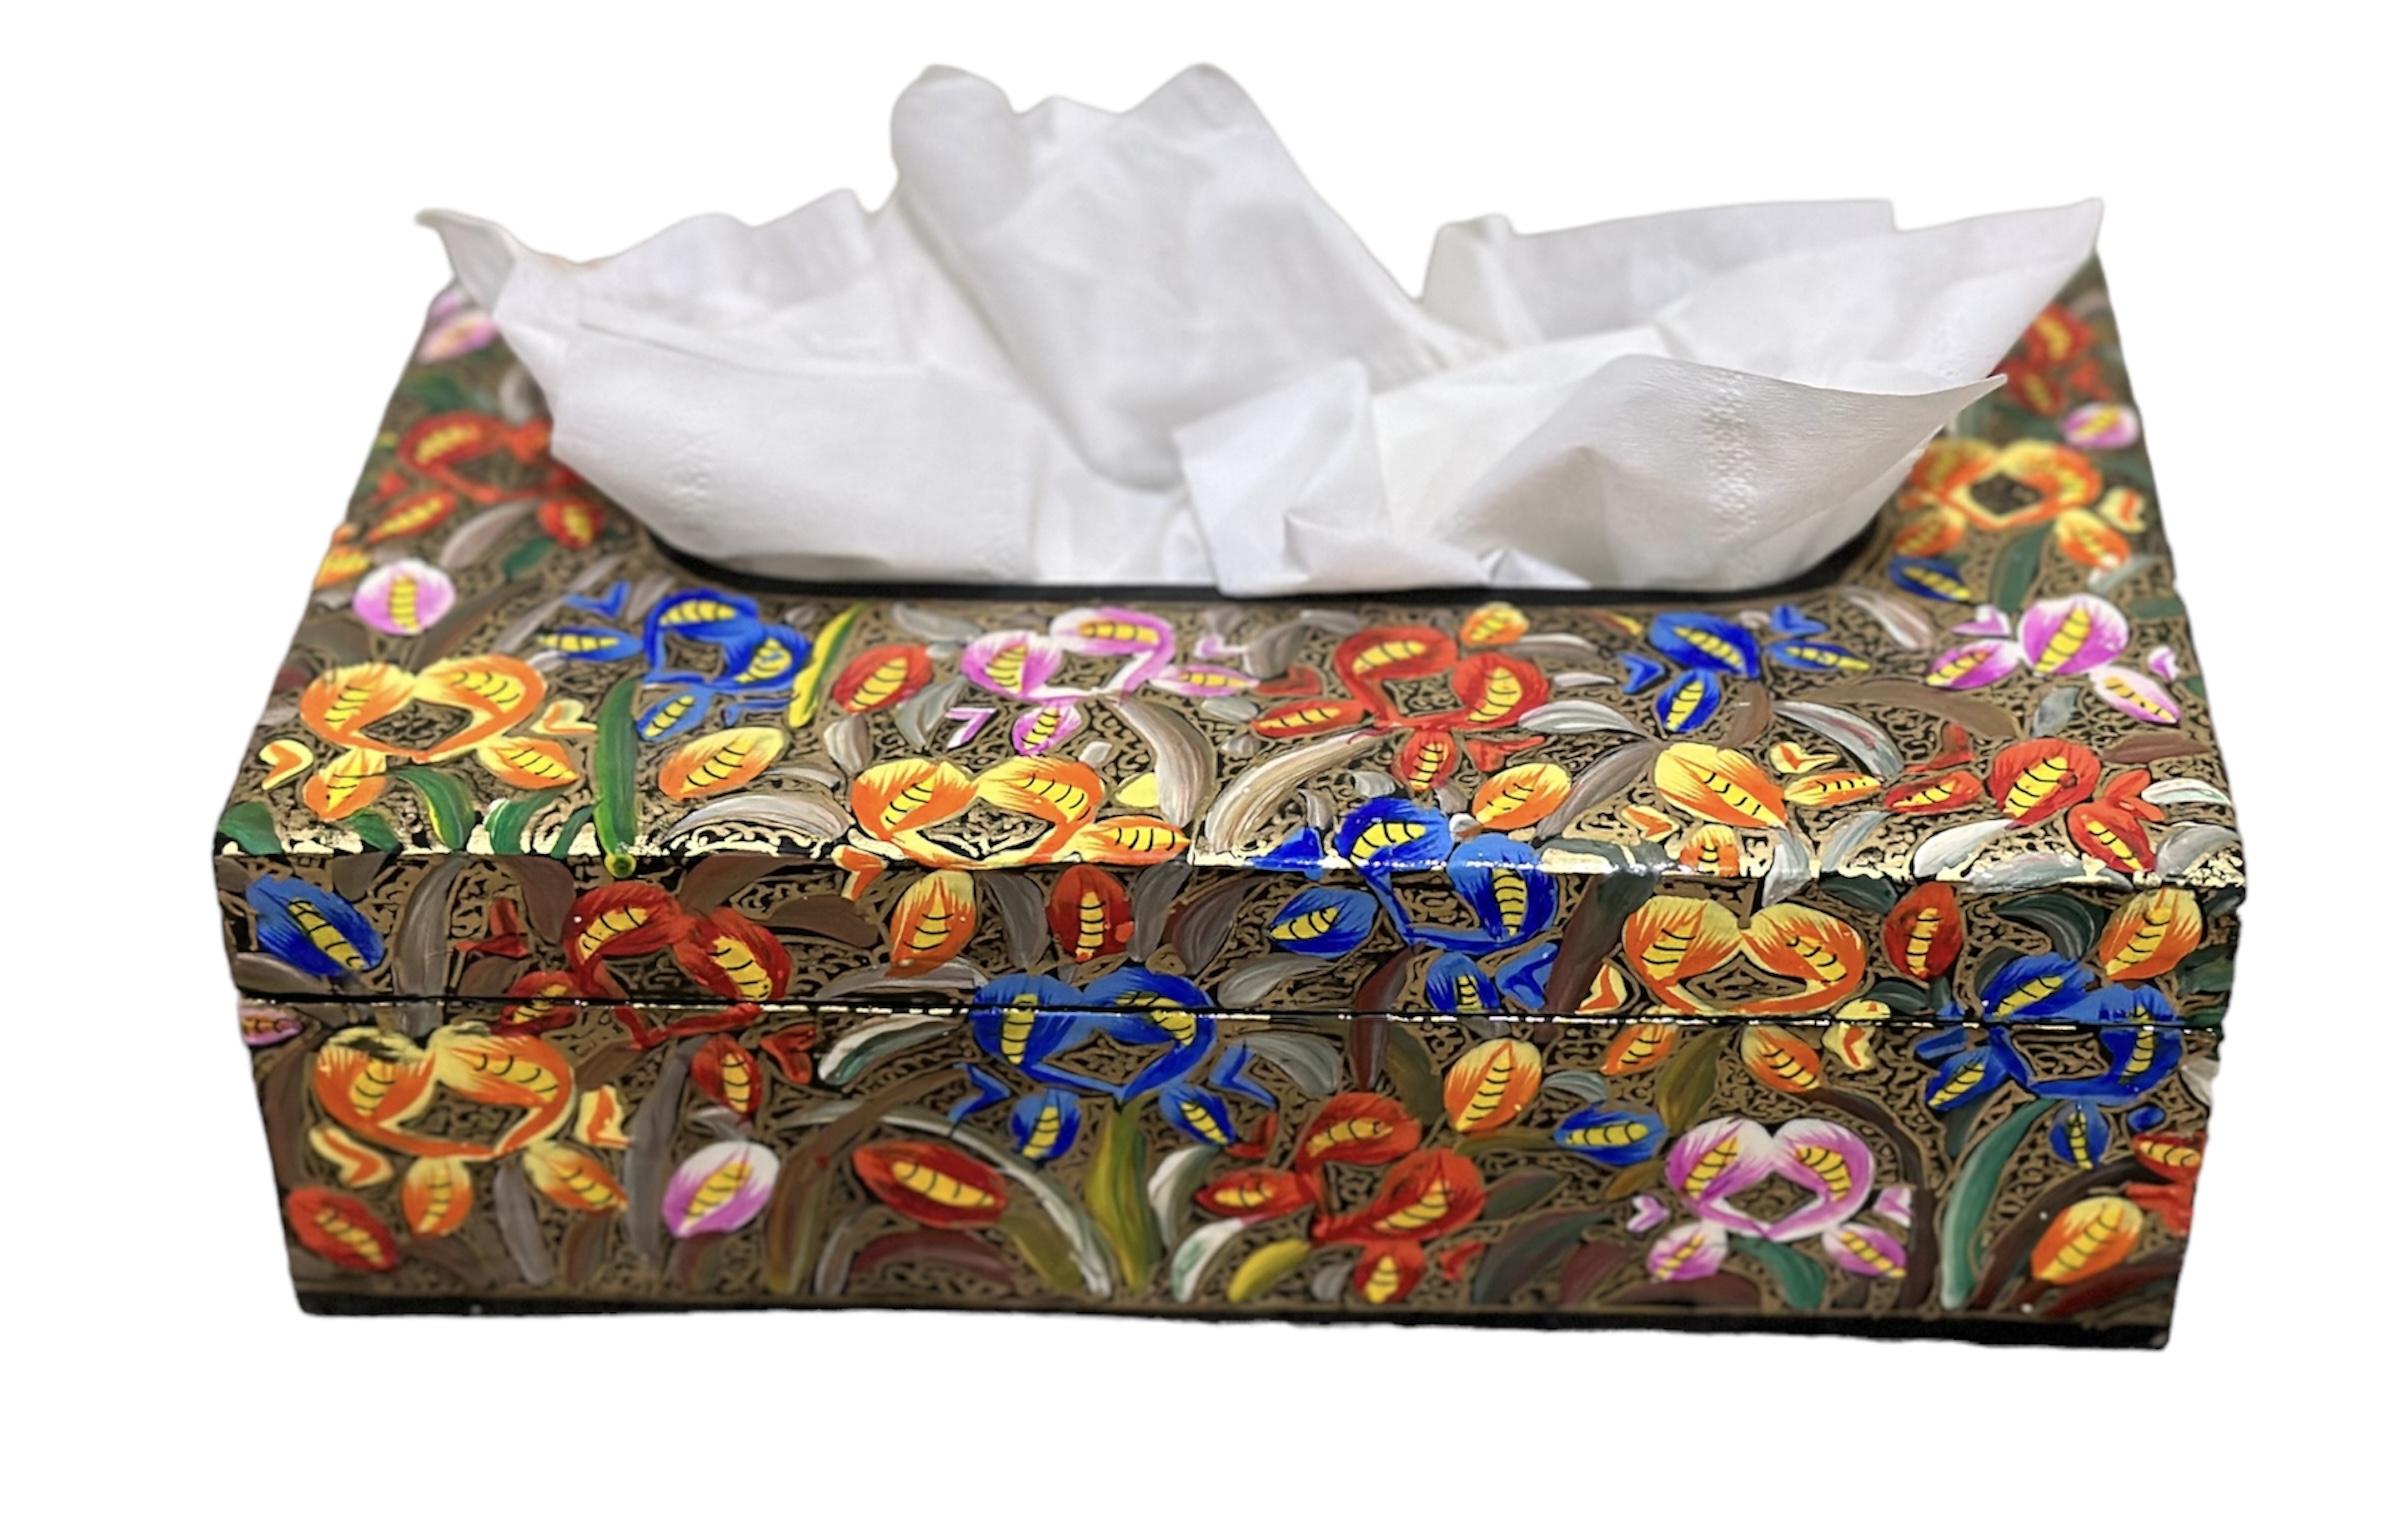 Paper mache tissue box, hand painted tissue holder, colorful tissue holders